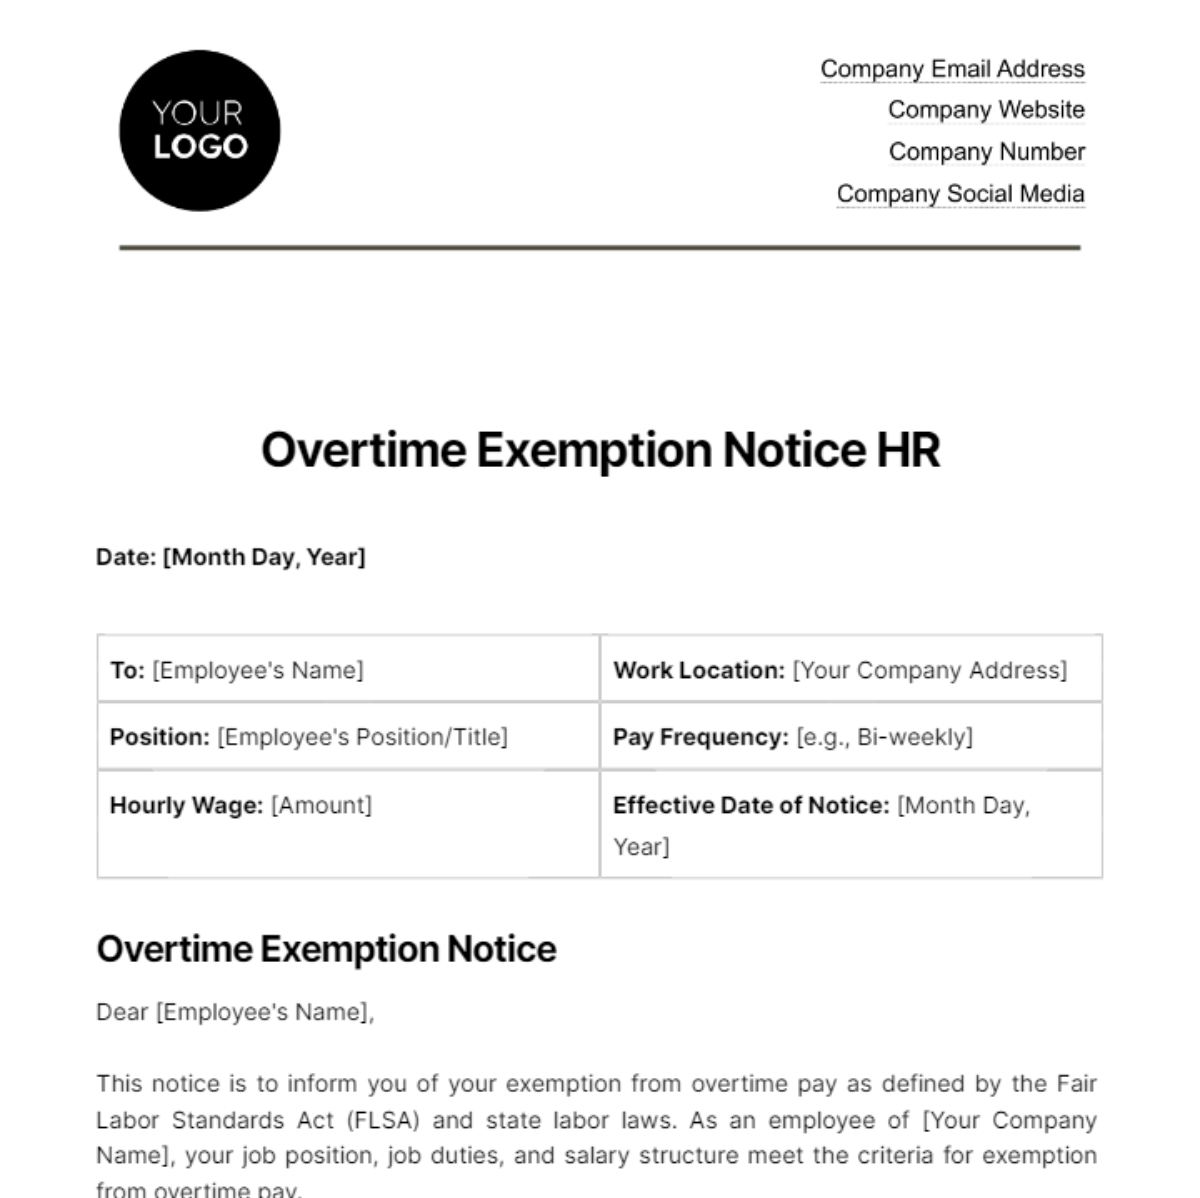 Overtime Exemption Notice HR Template